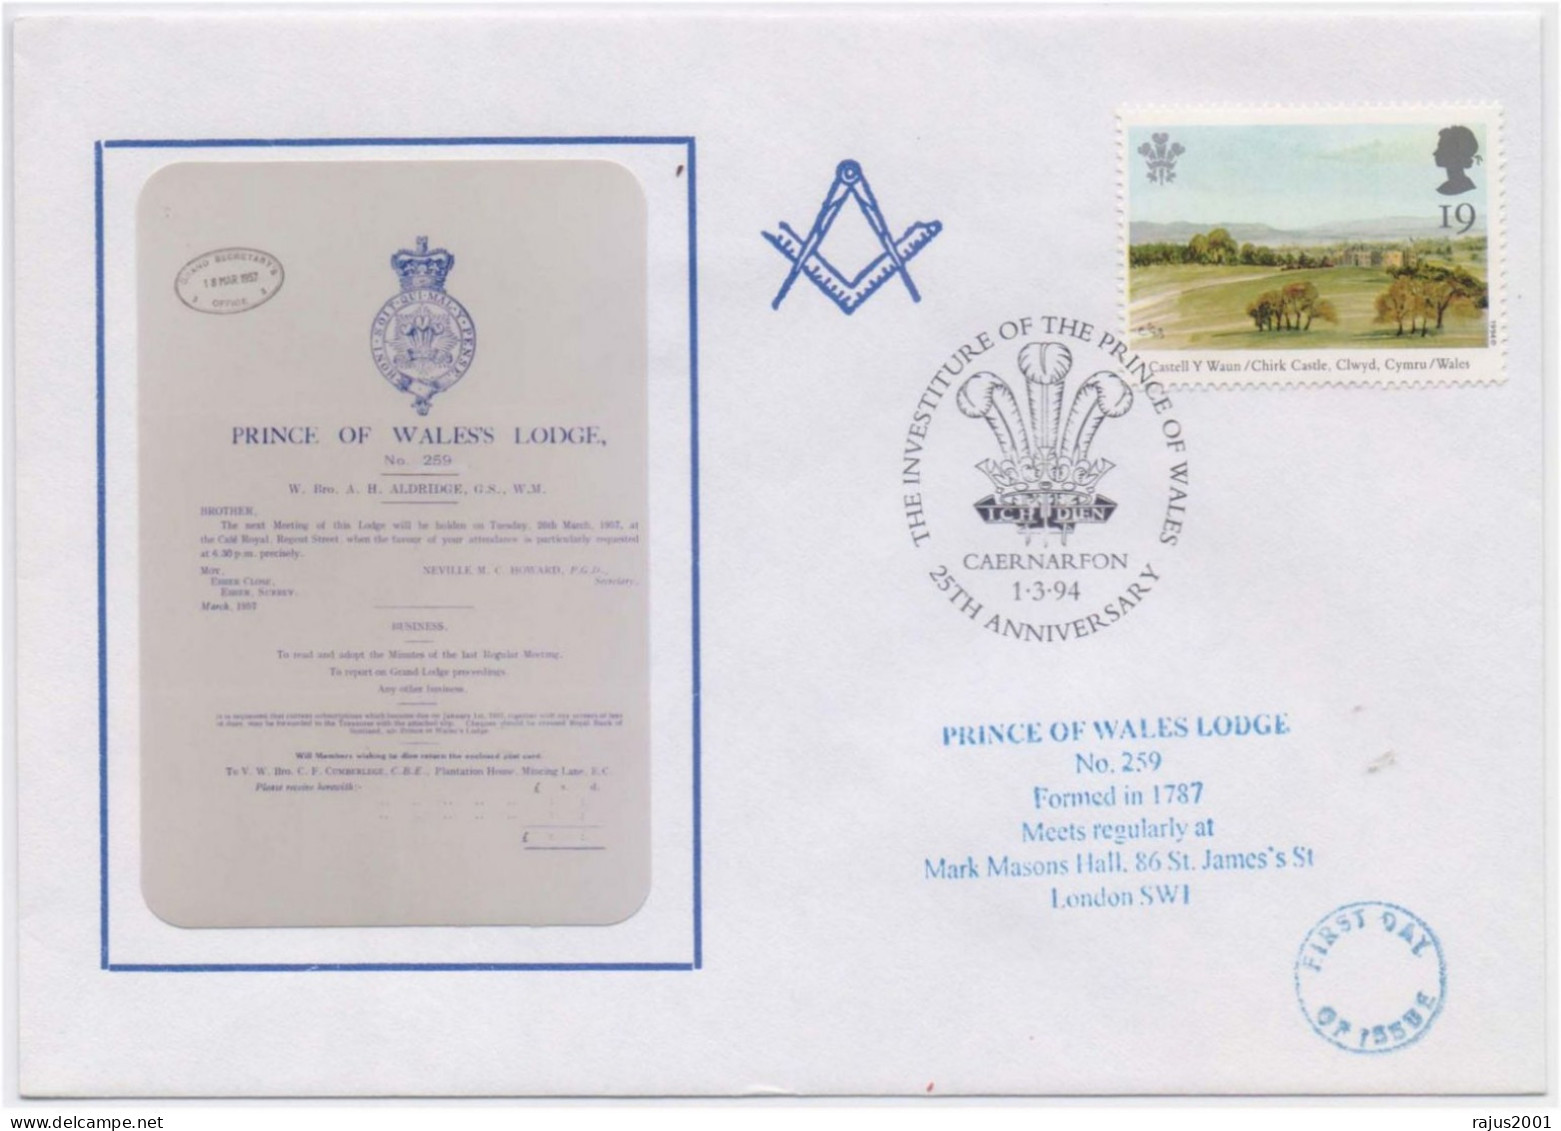 PRINCE OF WALES LODGE NO 259, FORMED IN 1787, Freemasonry Masonic Limited Only 75 Cover Issued Great Britain Cover - Francmasonería